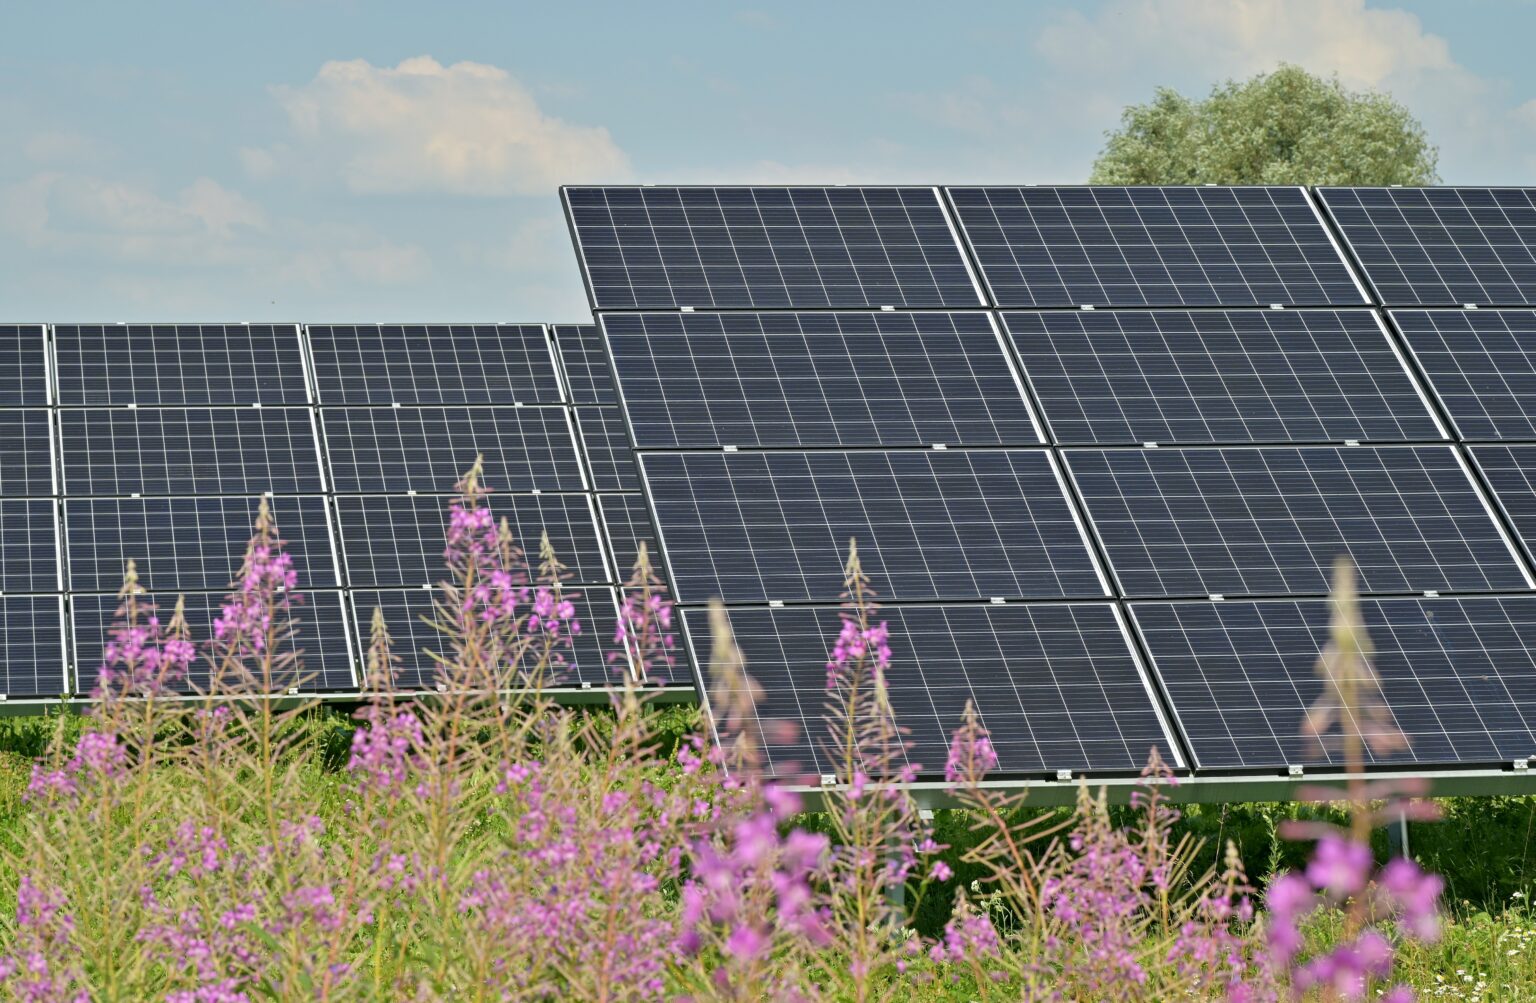 Croatian solar needs to undergo rapid expansion to catch neighbouring European countries and to do so the Government has reduced implementation costs and permit delays.